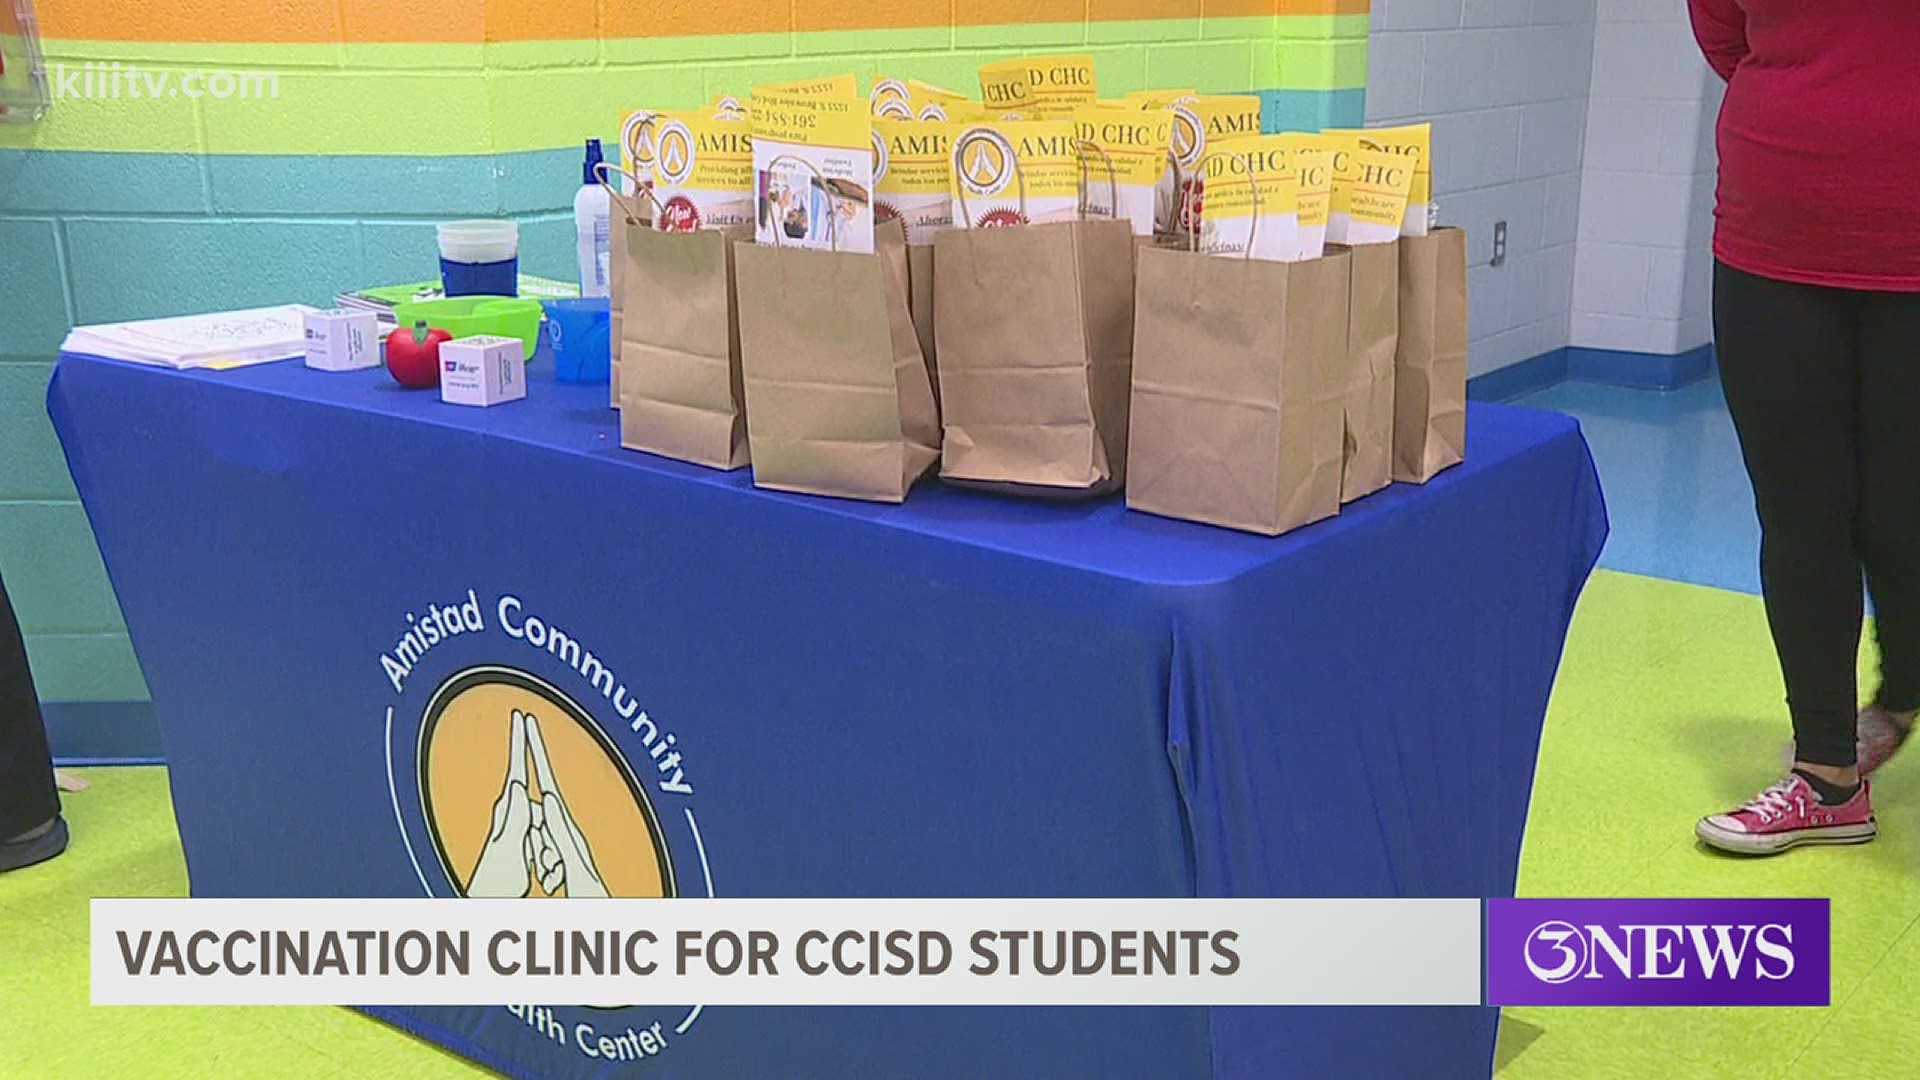 The Amistad Community Health hosted a vaccination clinic on Tuesday, October 27 for CCISD elementary students.